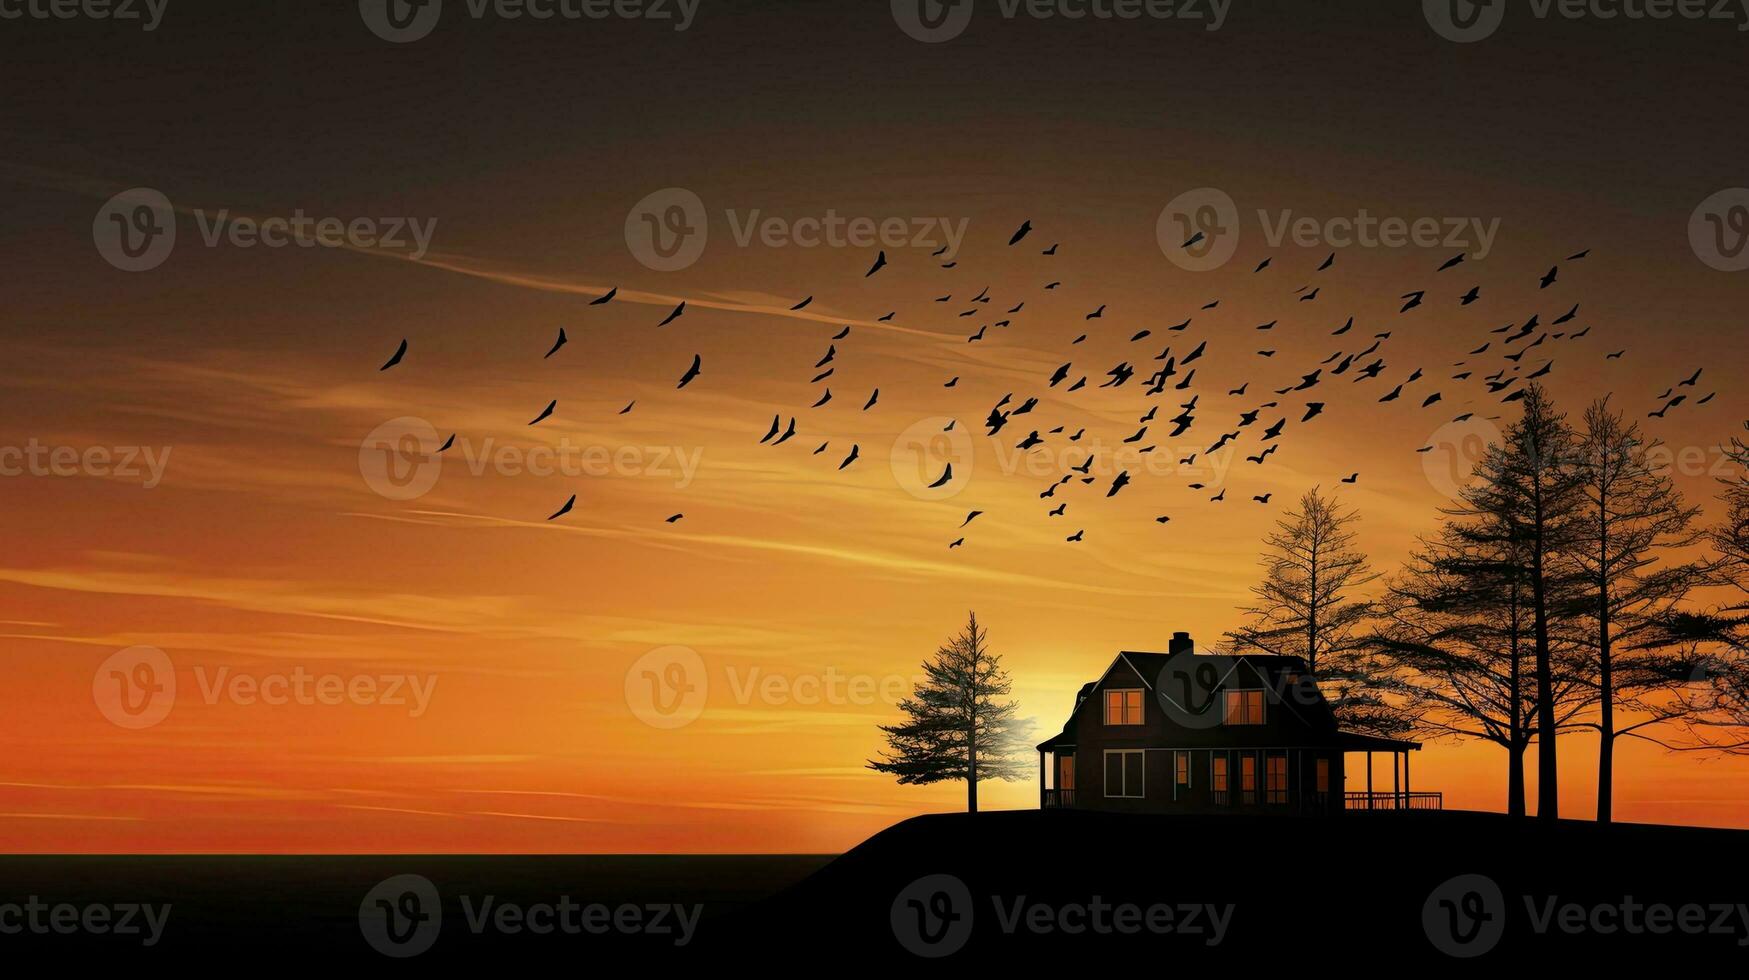 Trees and home outline with birds in sunset sky creating a peaceful nature atmosphere photo